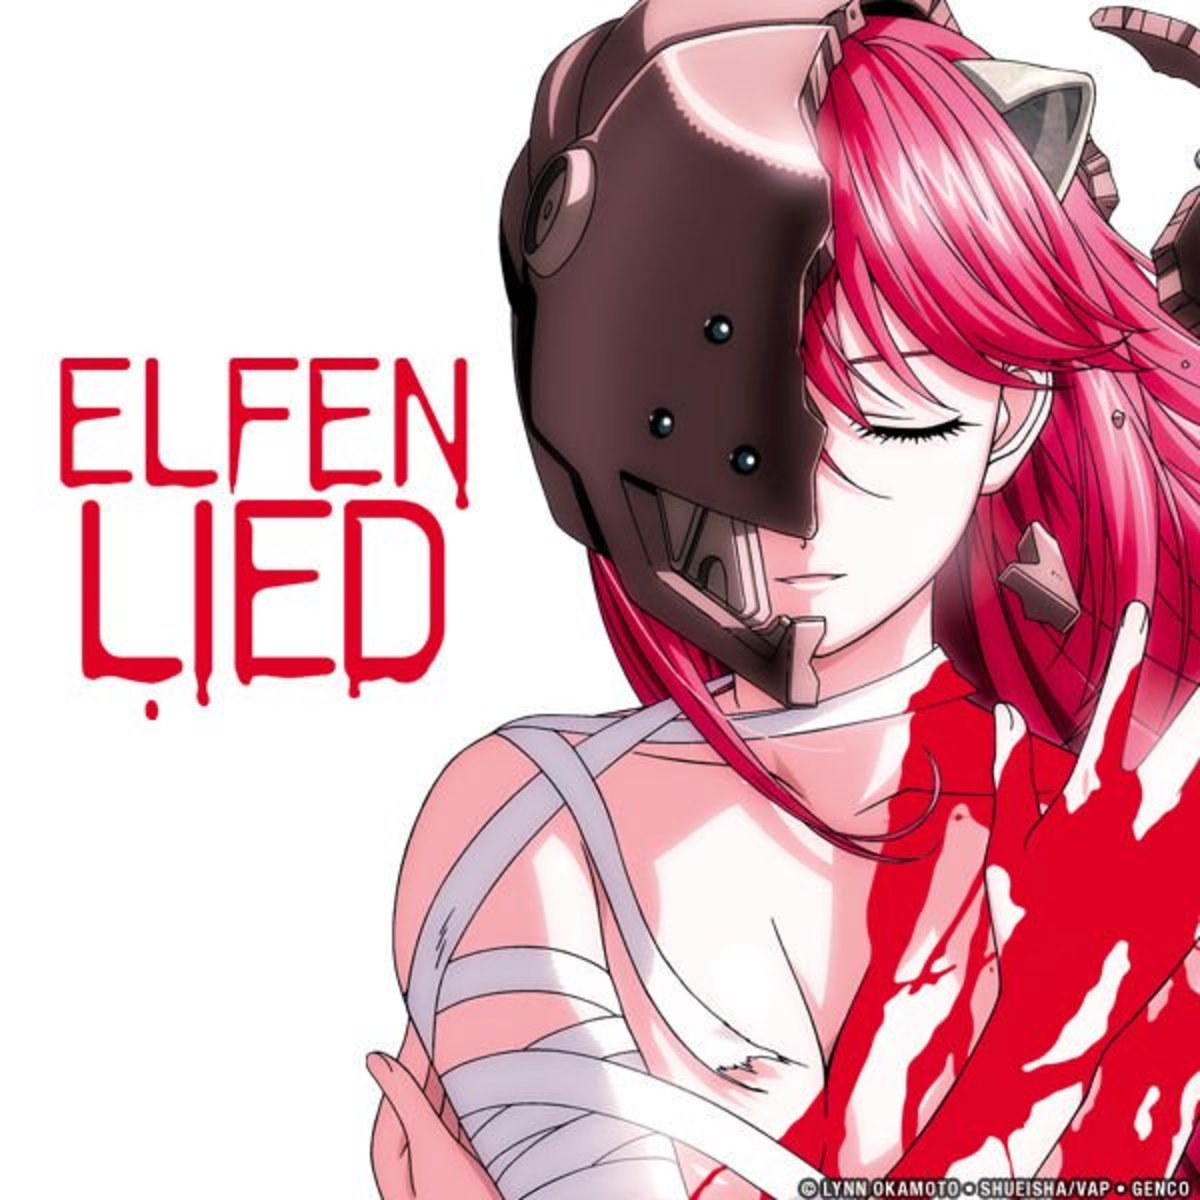 Elfen lied (2004) Story Explained  Elfen Lied Episode 1 - 13 Explained  with Ending / Anime Guy 